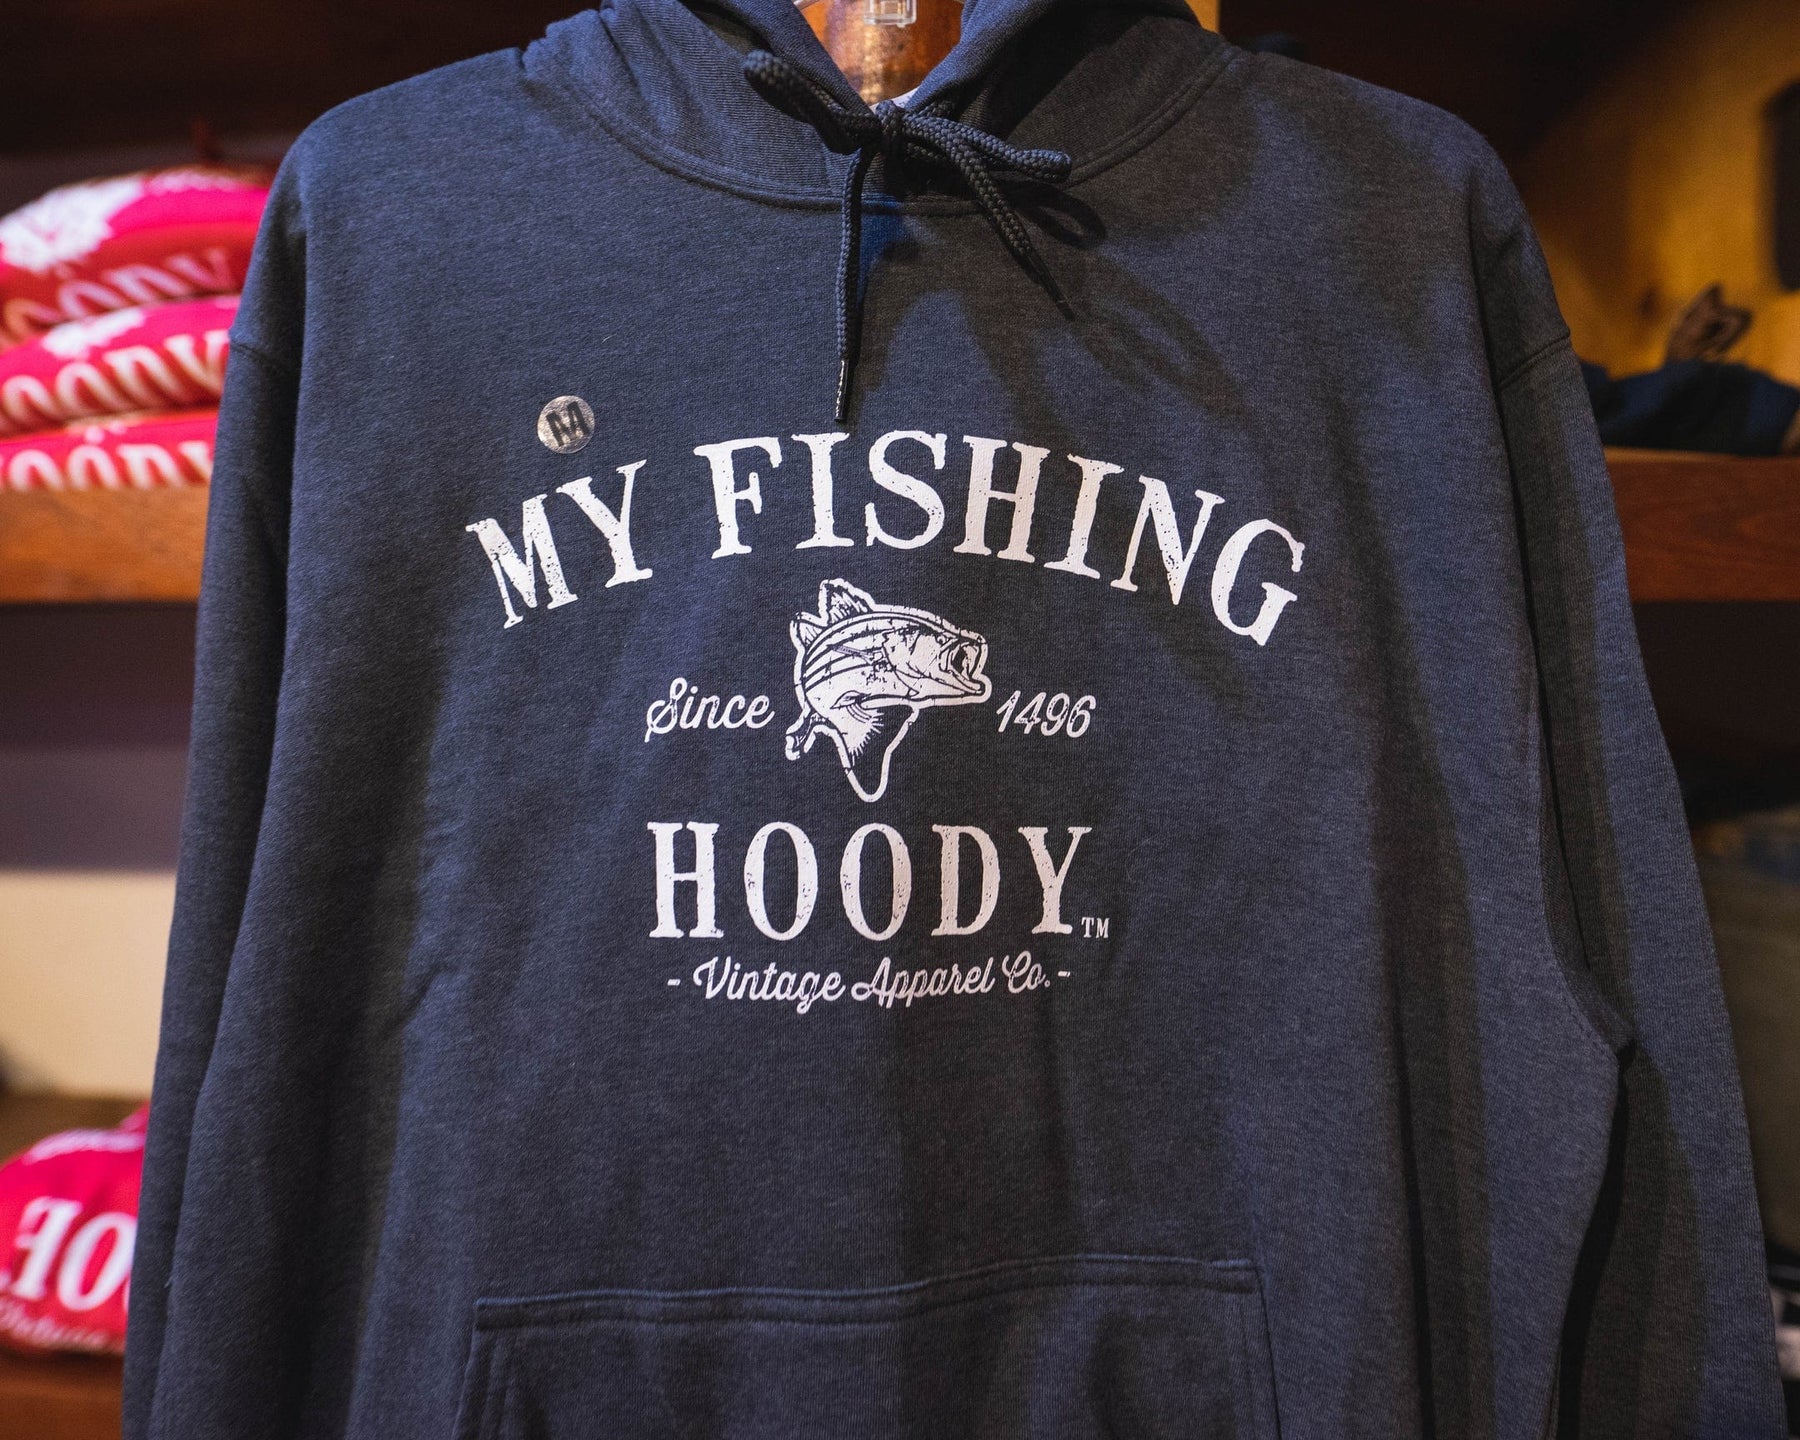  Rogue River Tactical Funny Fish Fear Me Fishing Hoodie